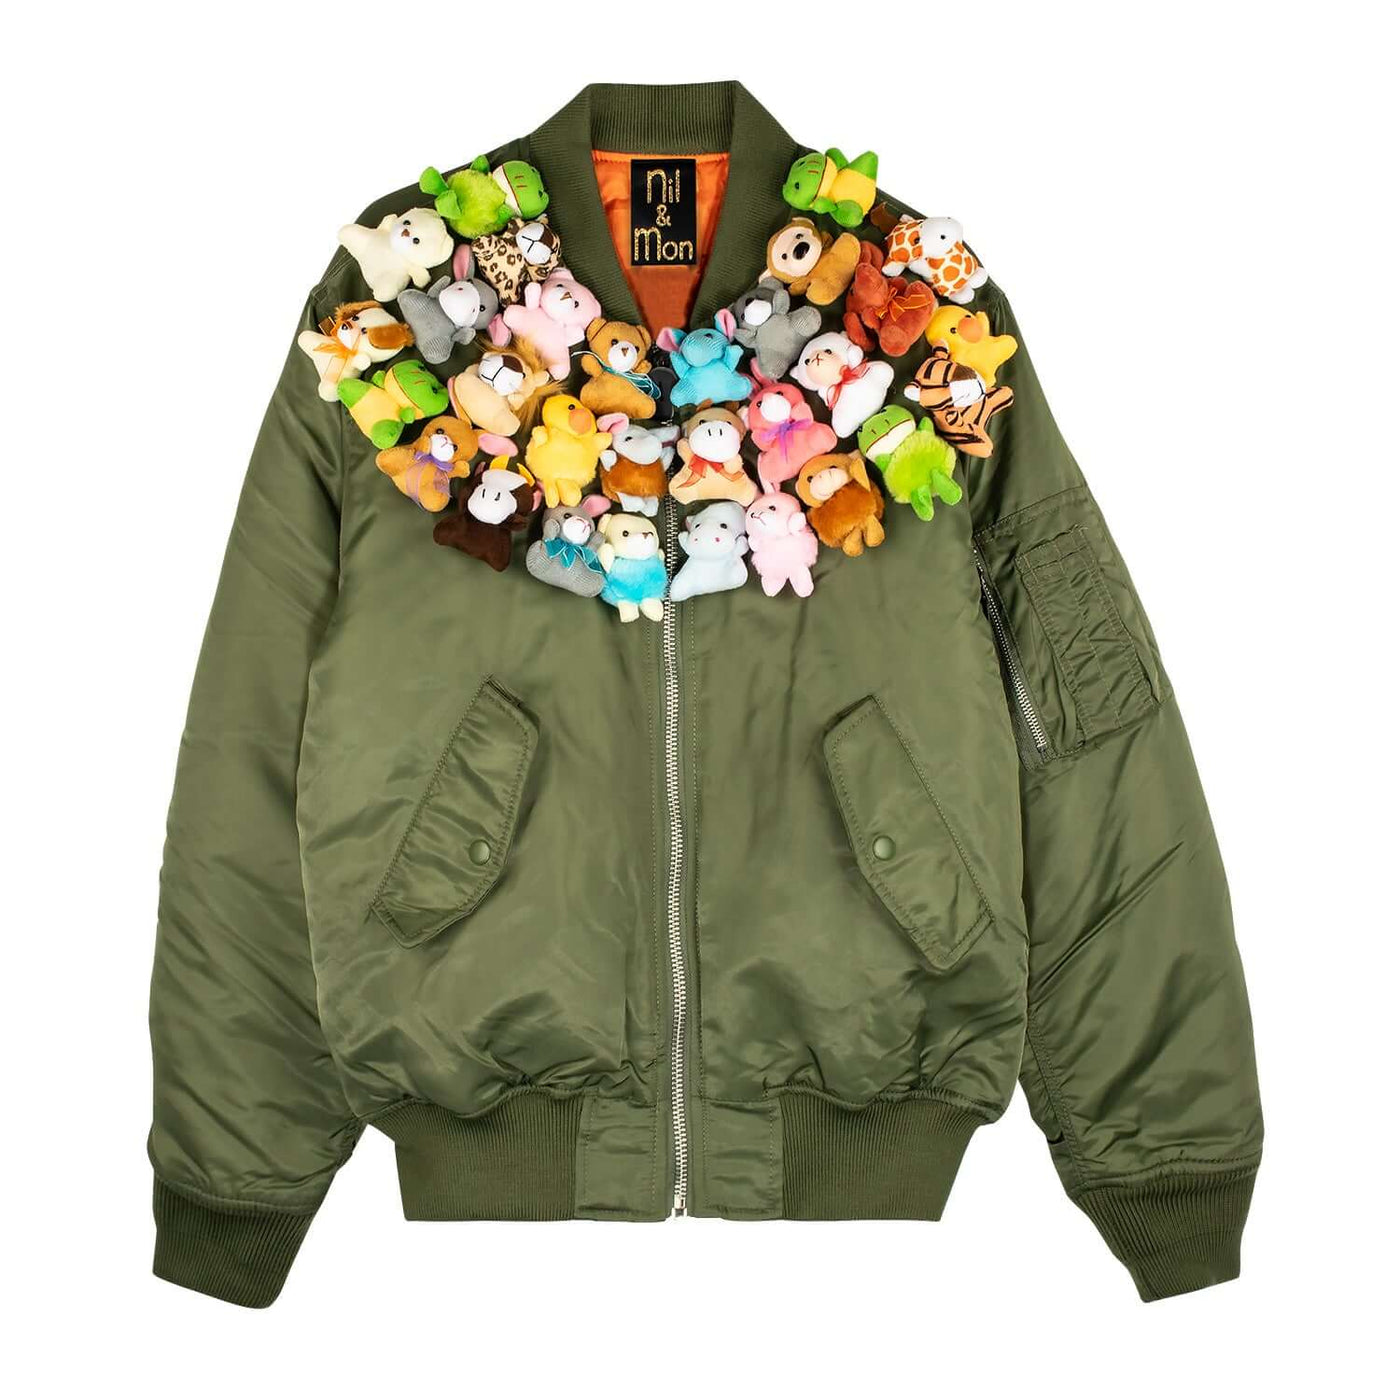 Bomber Jacket "Toy Story" - army green